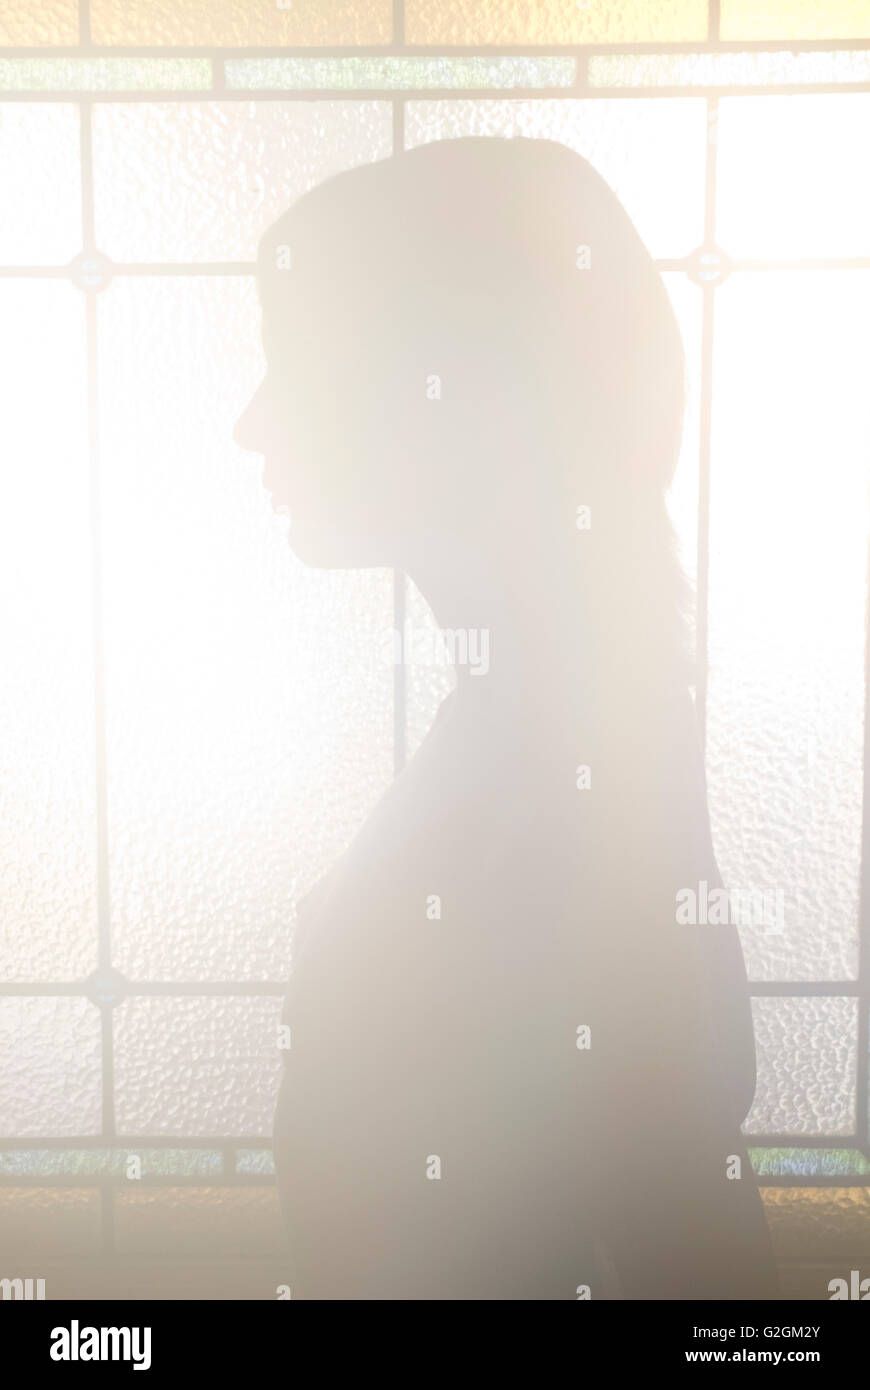 Woman Silhouette Against Stained Glass Stock Photo